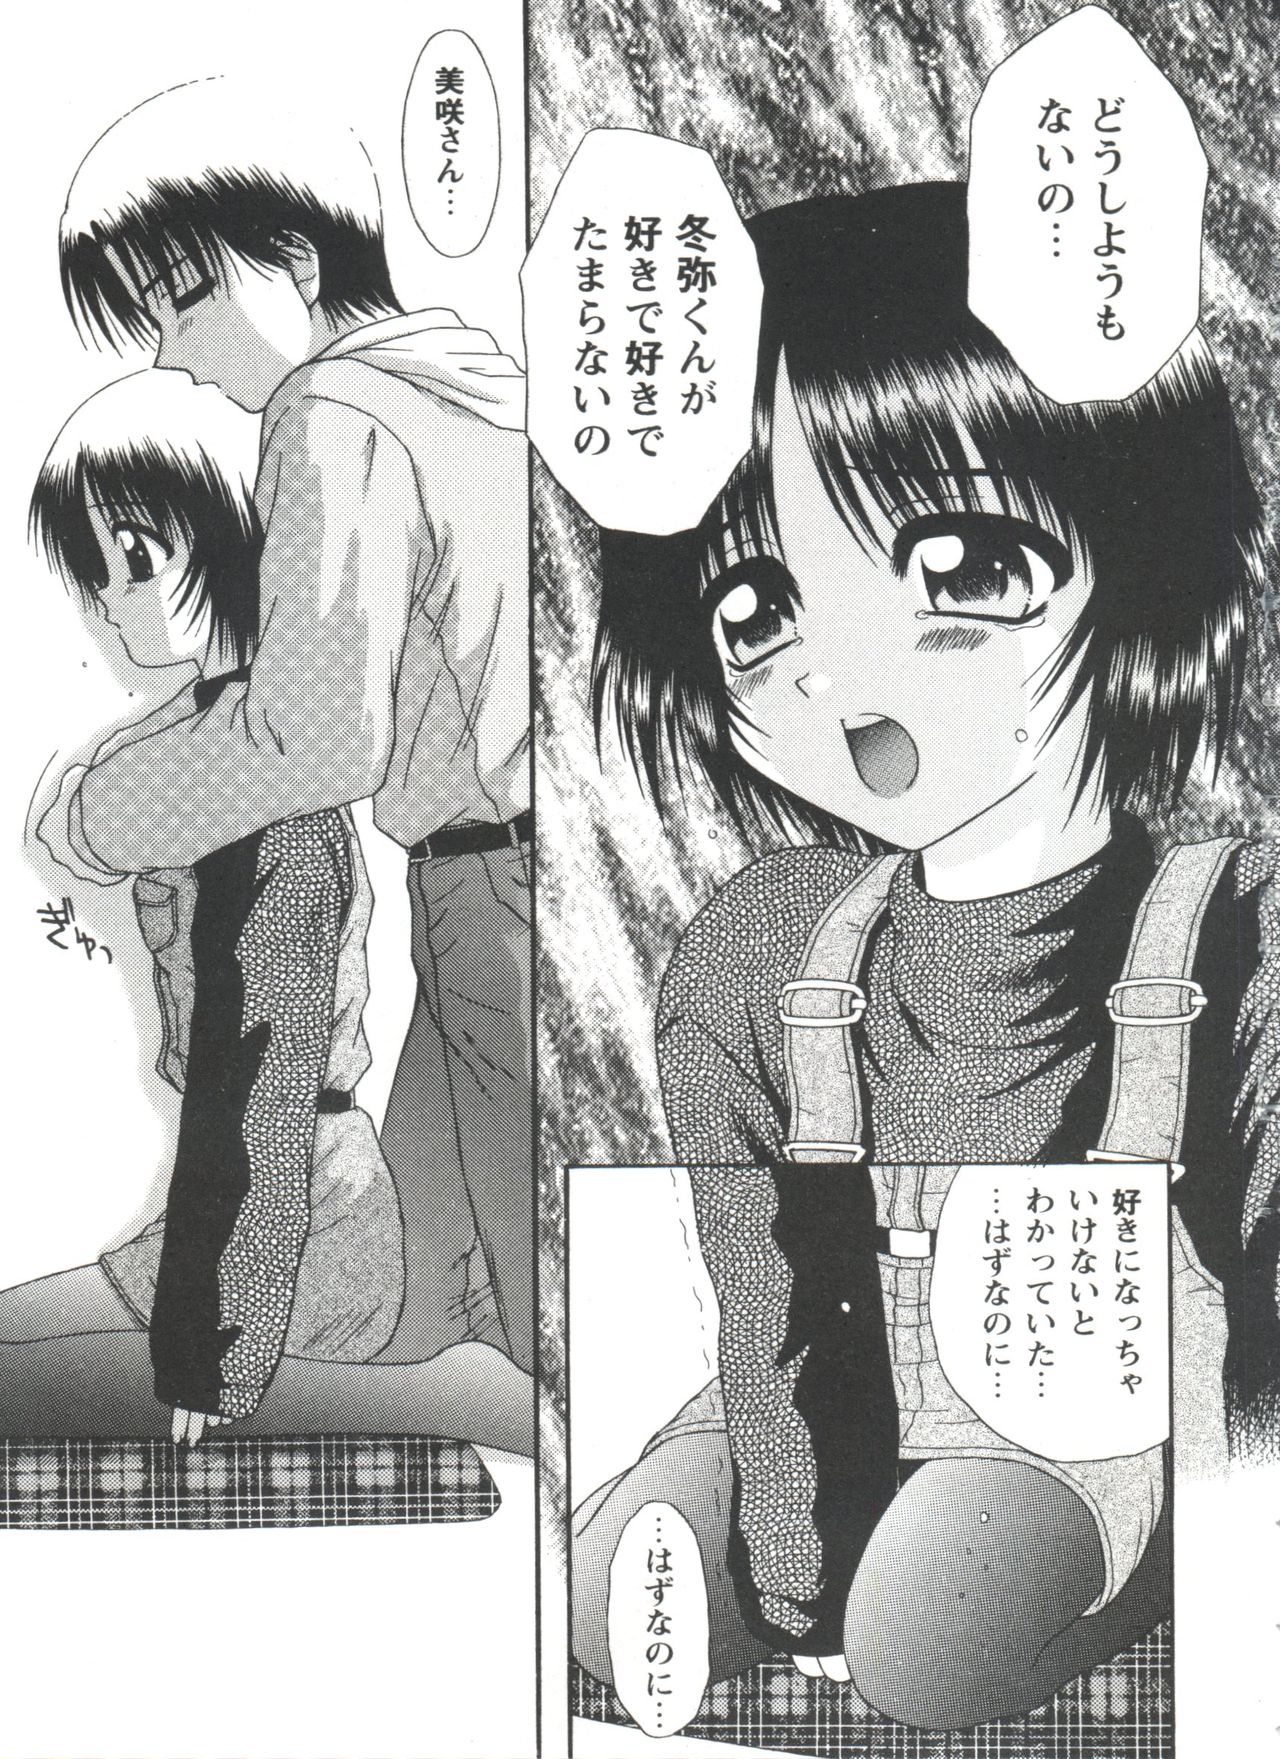 [Anthology] Love Heart 4 (To Heart, White Album) page 43 full